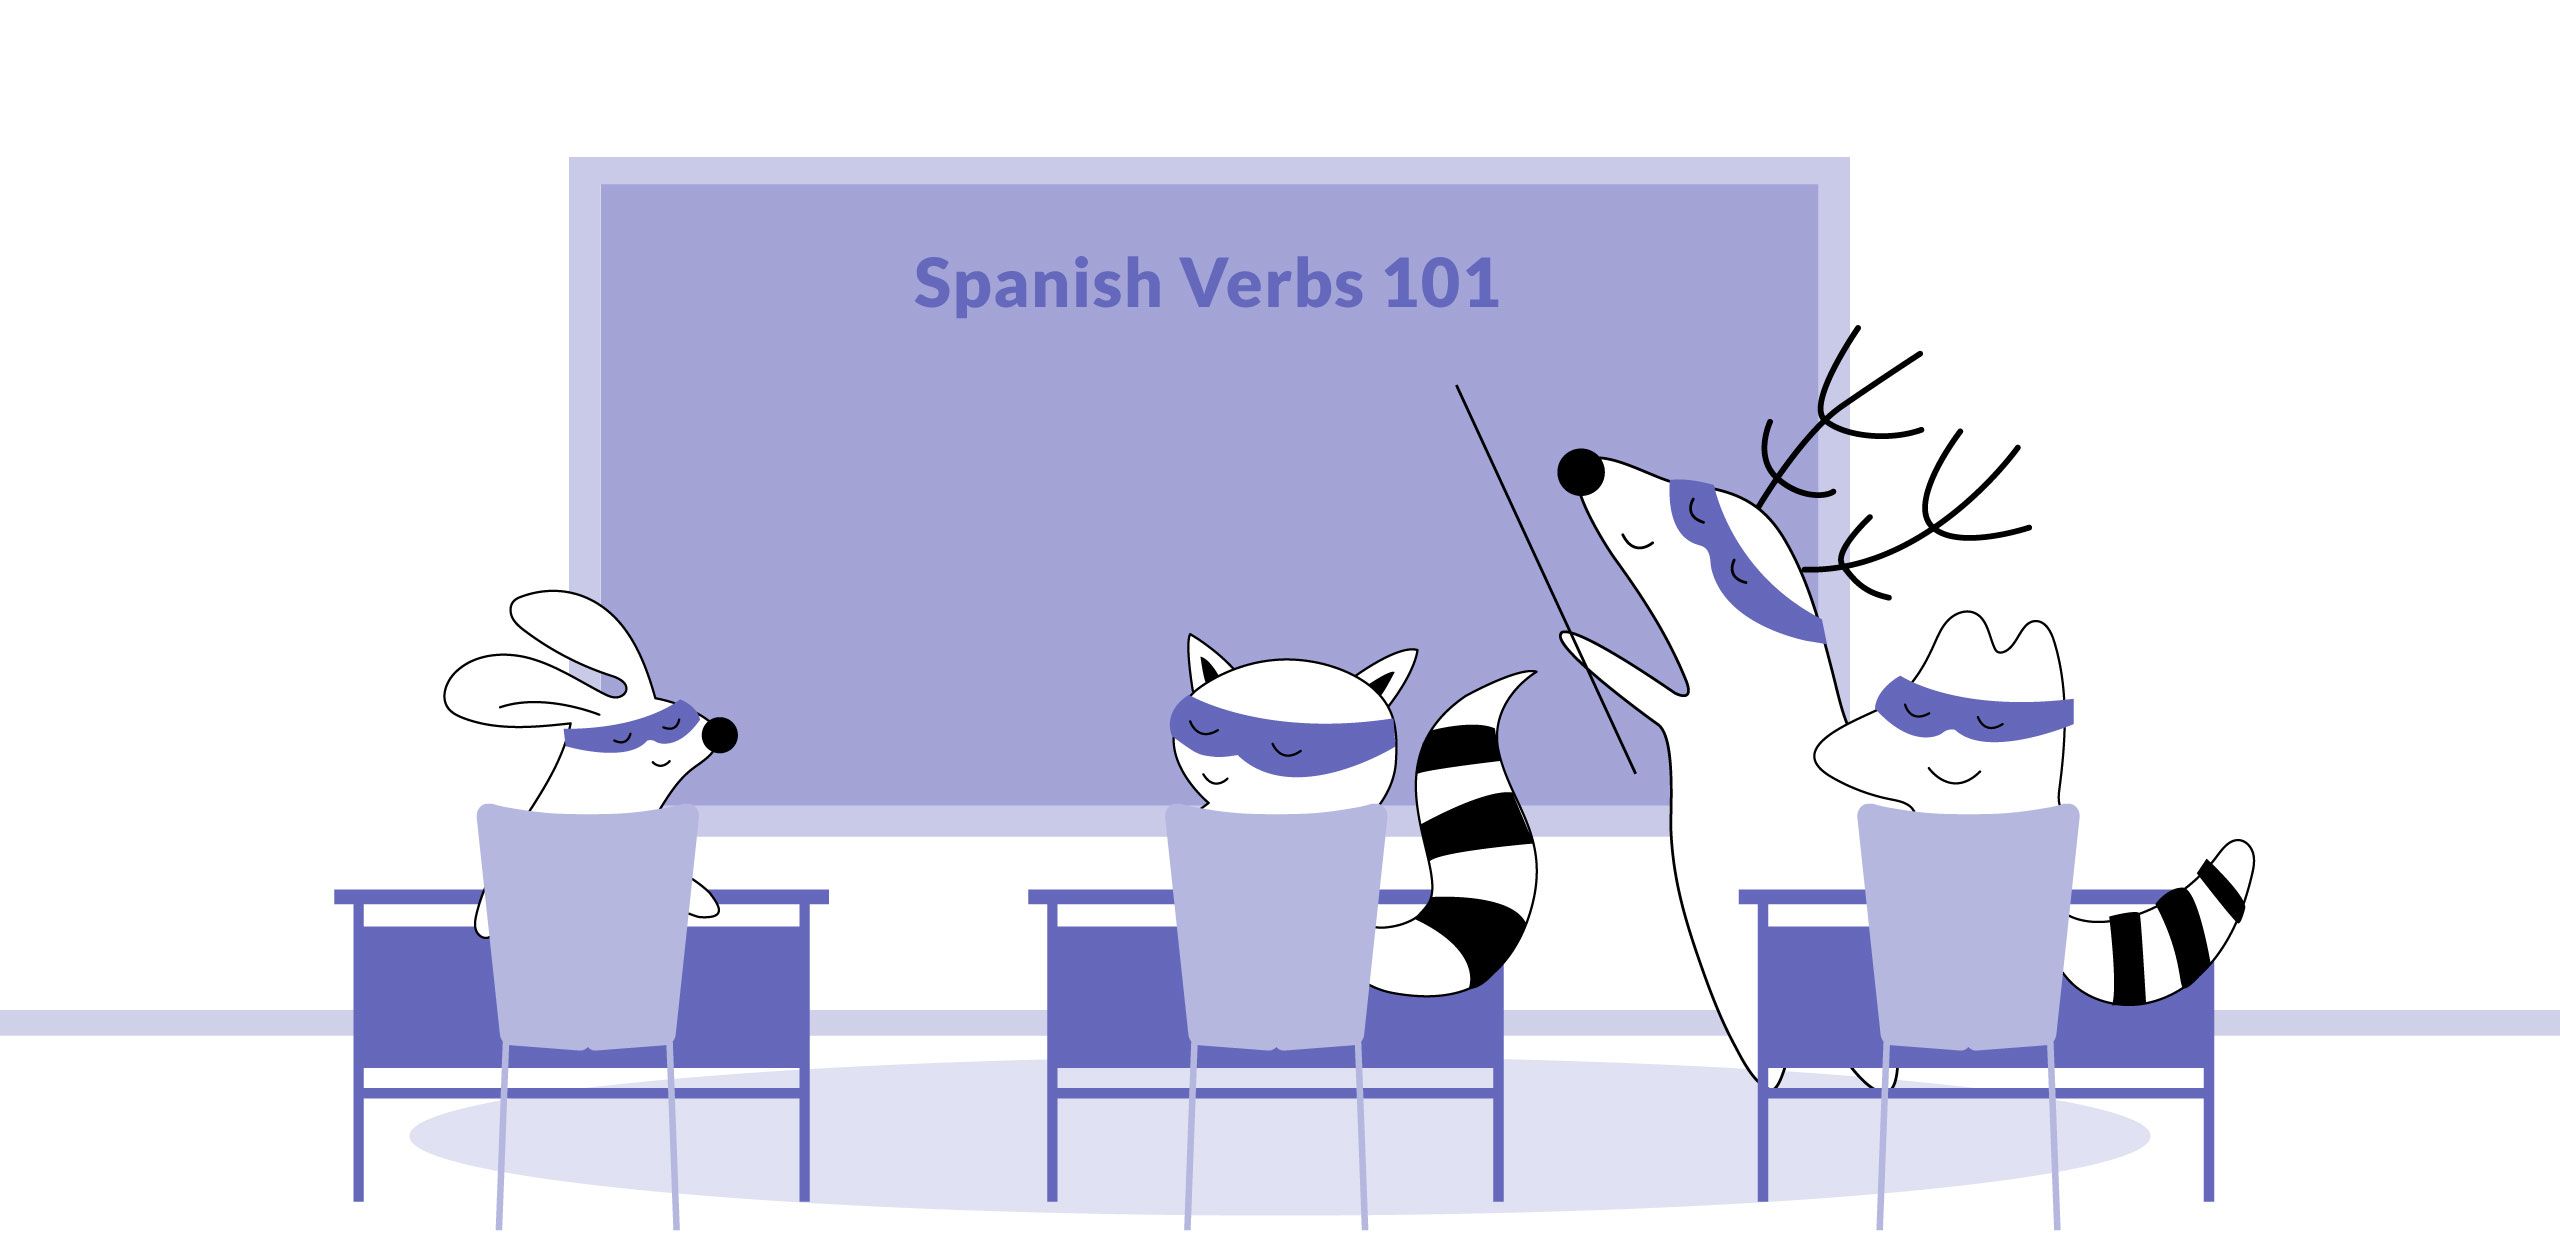 3-ways-to-conjugate-ir-verbs-in-spanish-wikihow